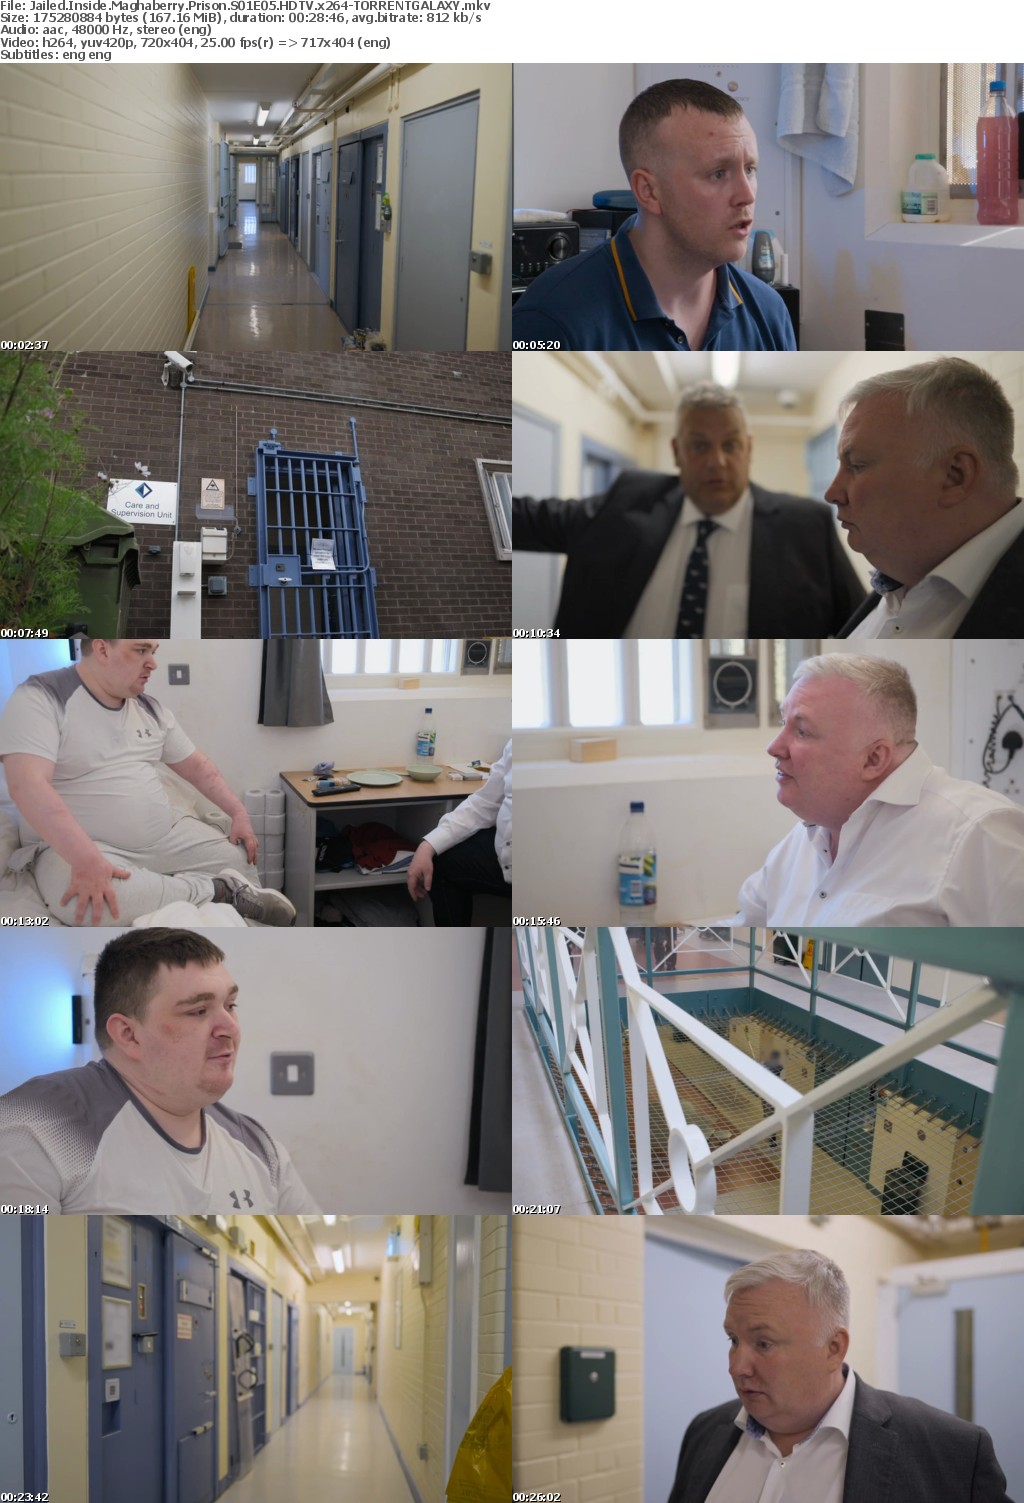 Jailed Inside Maghaberry Prison S01E05 HDTV x264-GALAXY